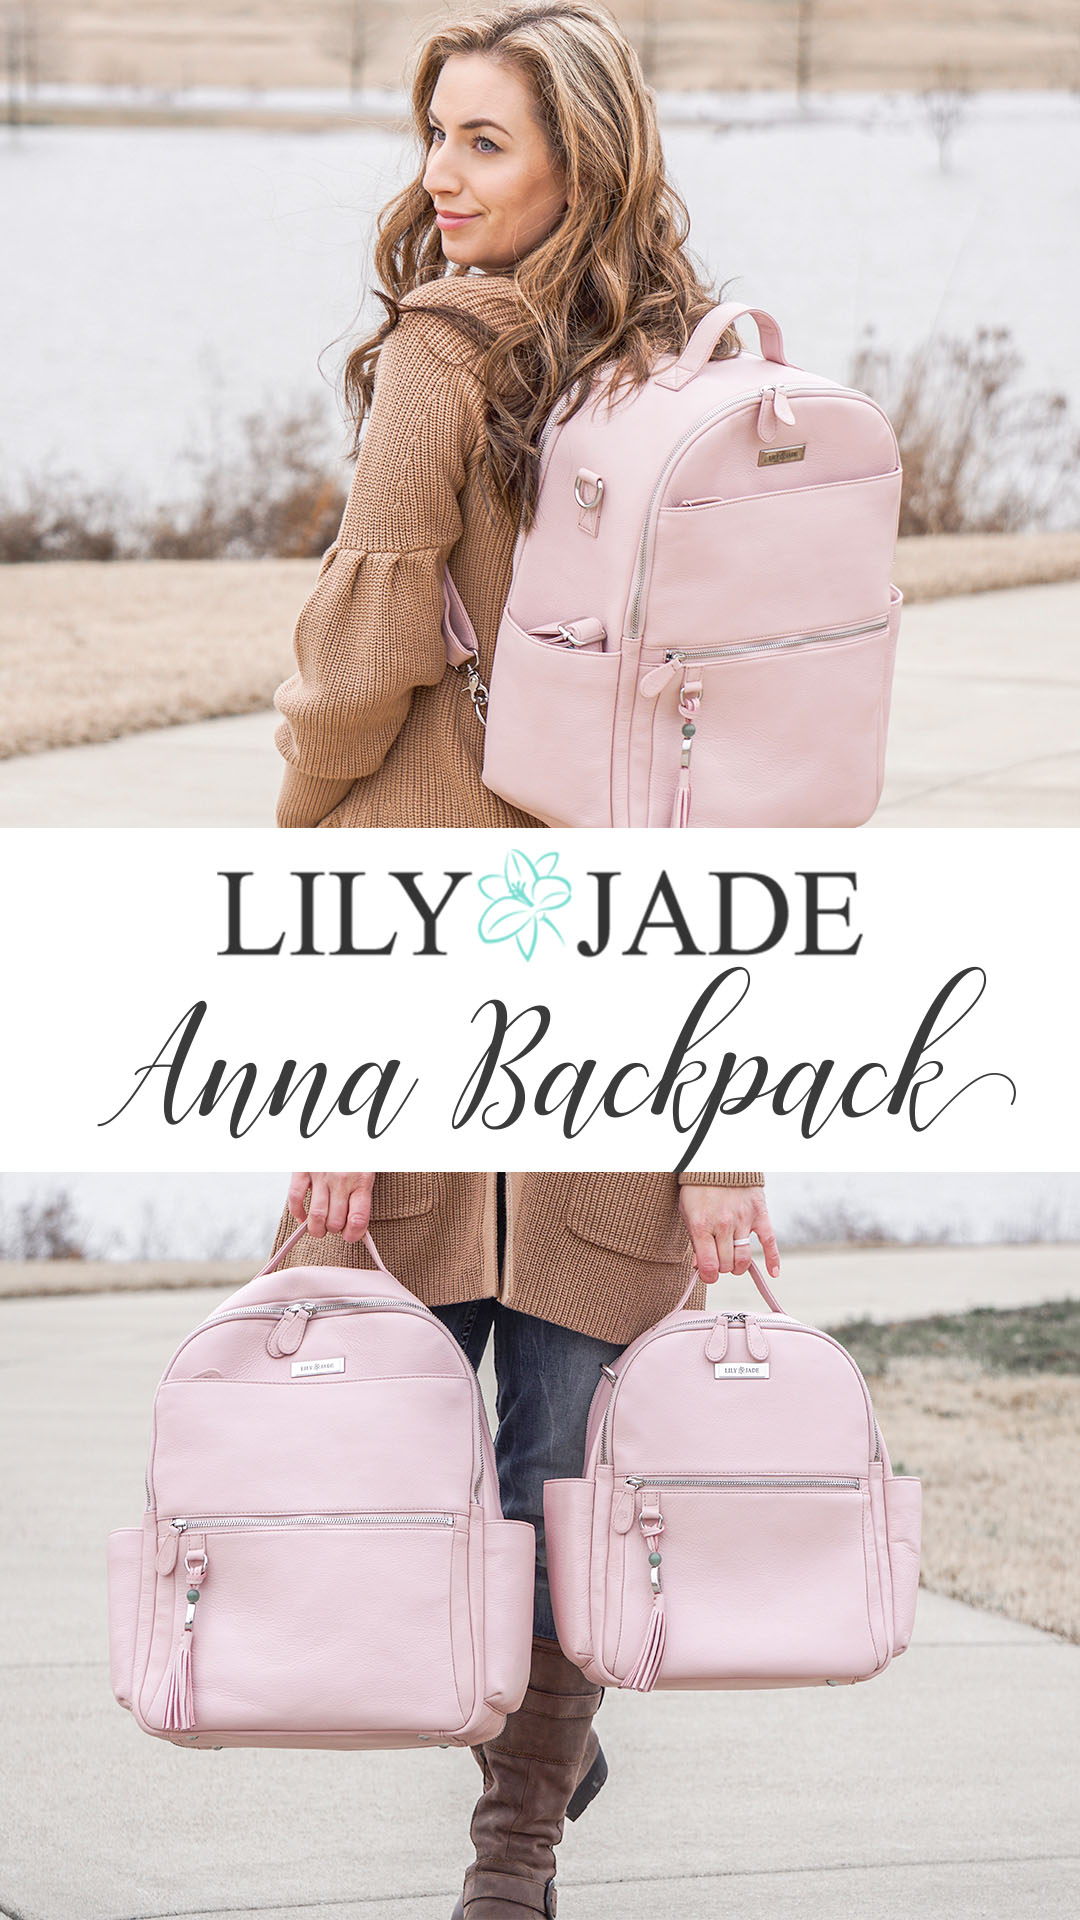 lily jade anna, anna backpack, large anna backpack, medium anna backpack, leather diaper bag, backpack, review, comparison, lily jade review, kateschwanke, kate schwanke